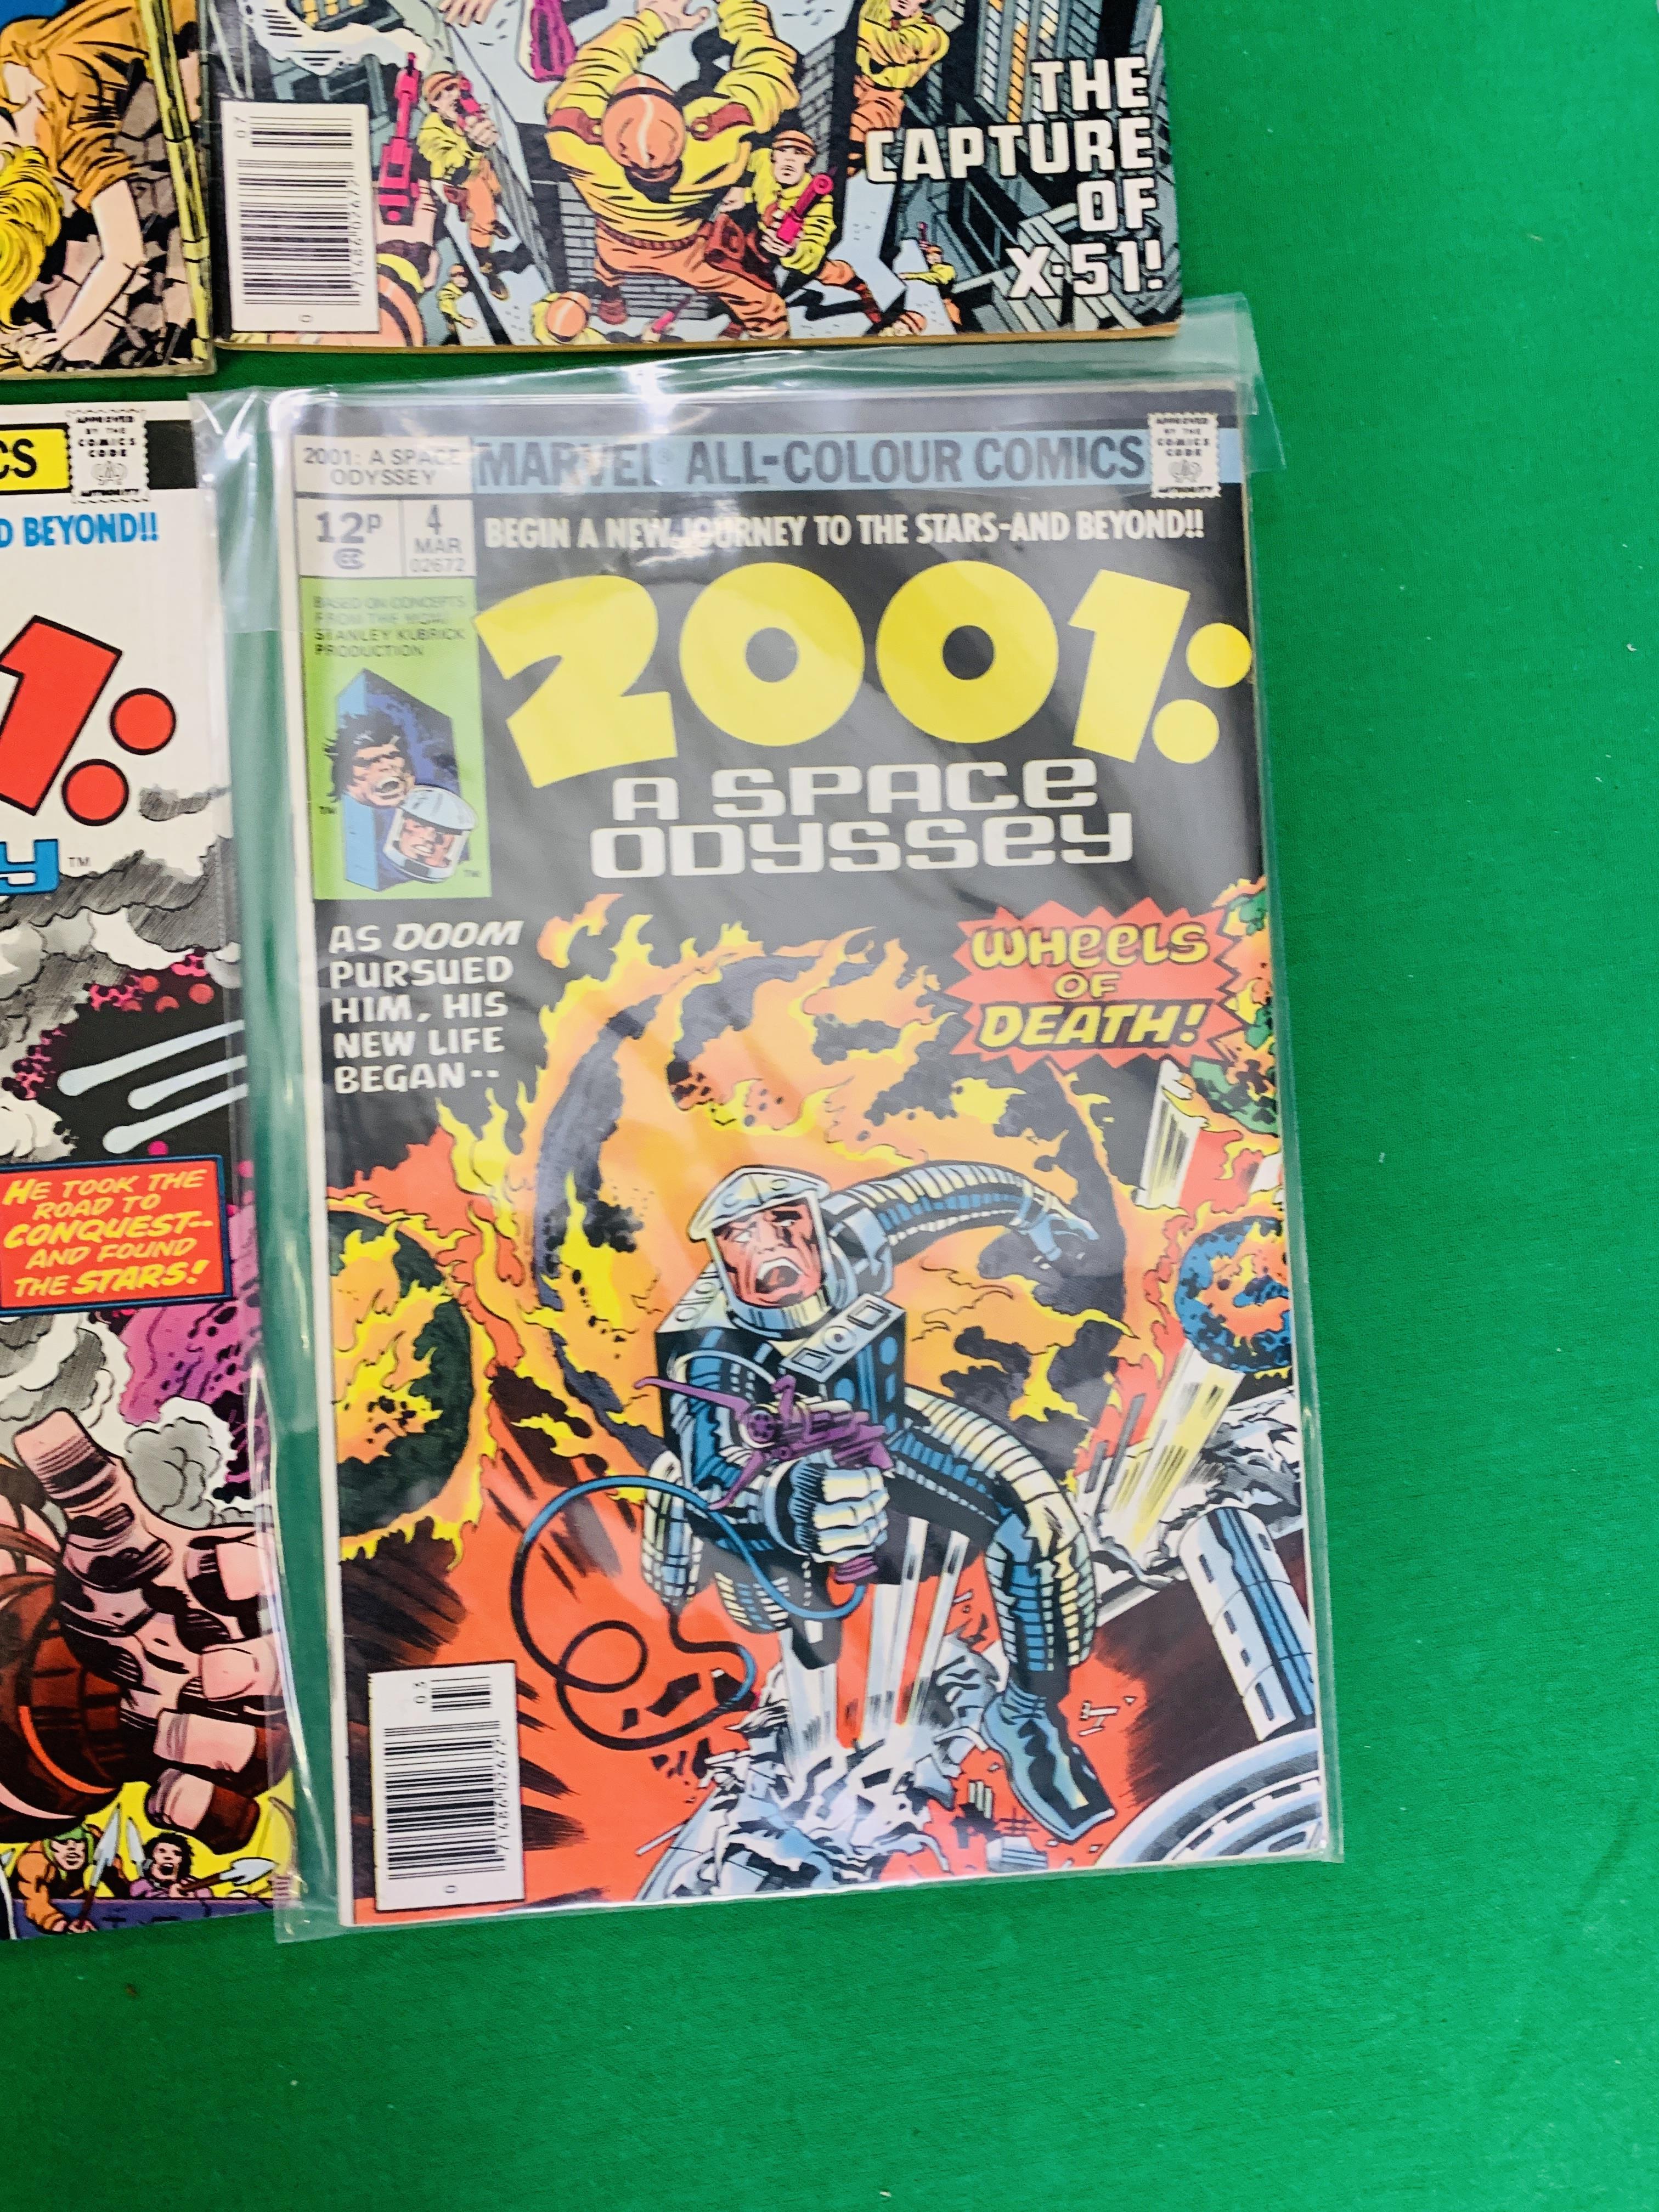 MARVEL COMICS 2001: A SPACE ODYSSEY NO. 1 - 10 FROM 1976, FIRST APPEARANCE NO. 8. MACHINE MAN X-51. - Image 5 of 11